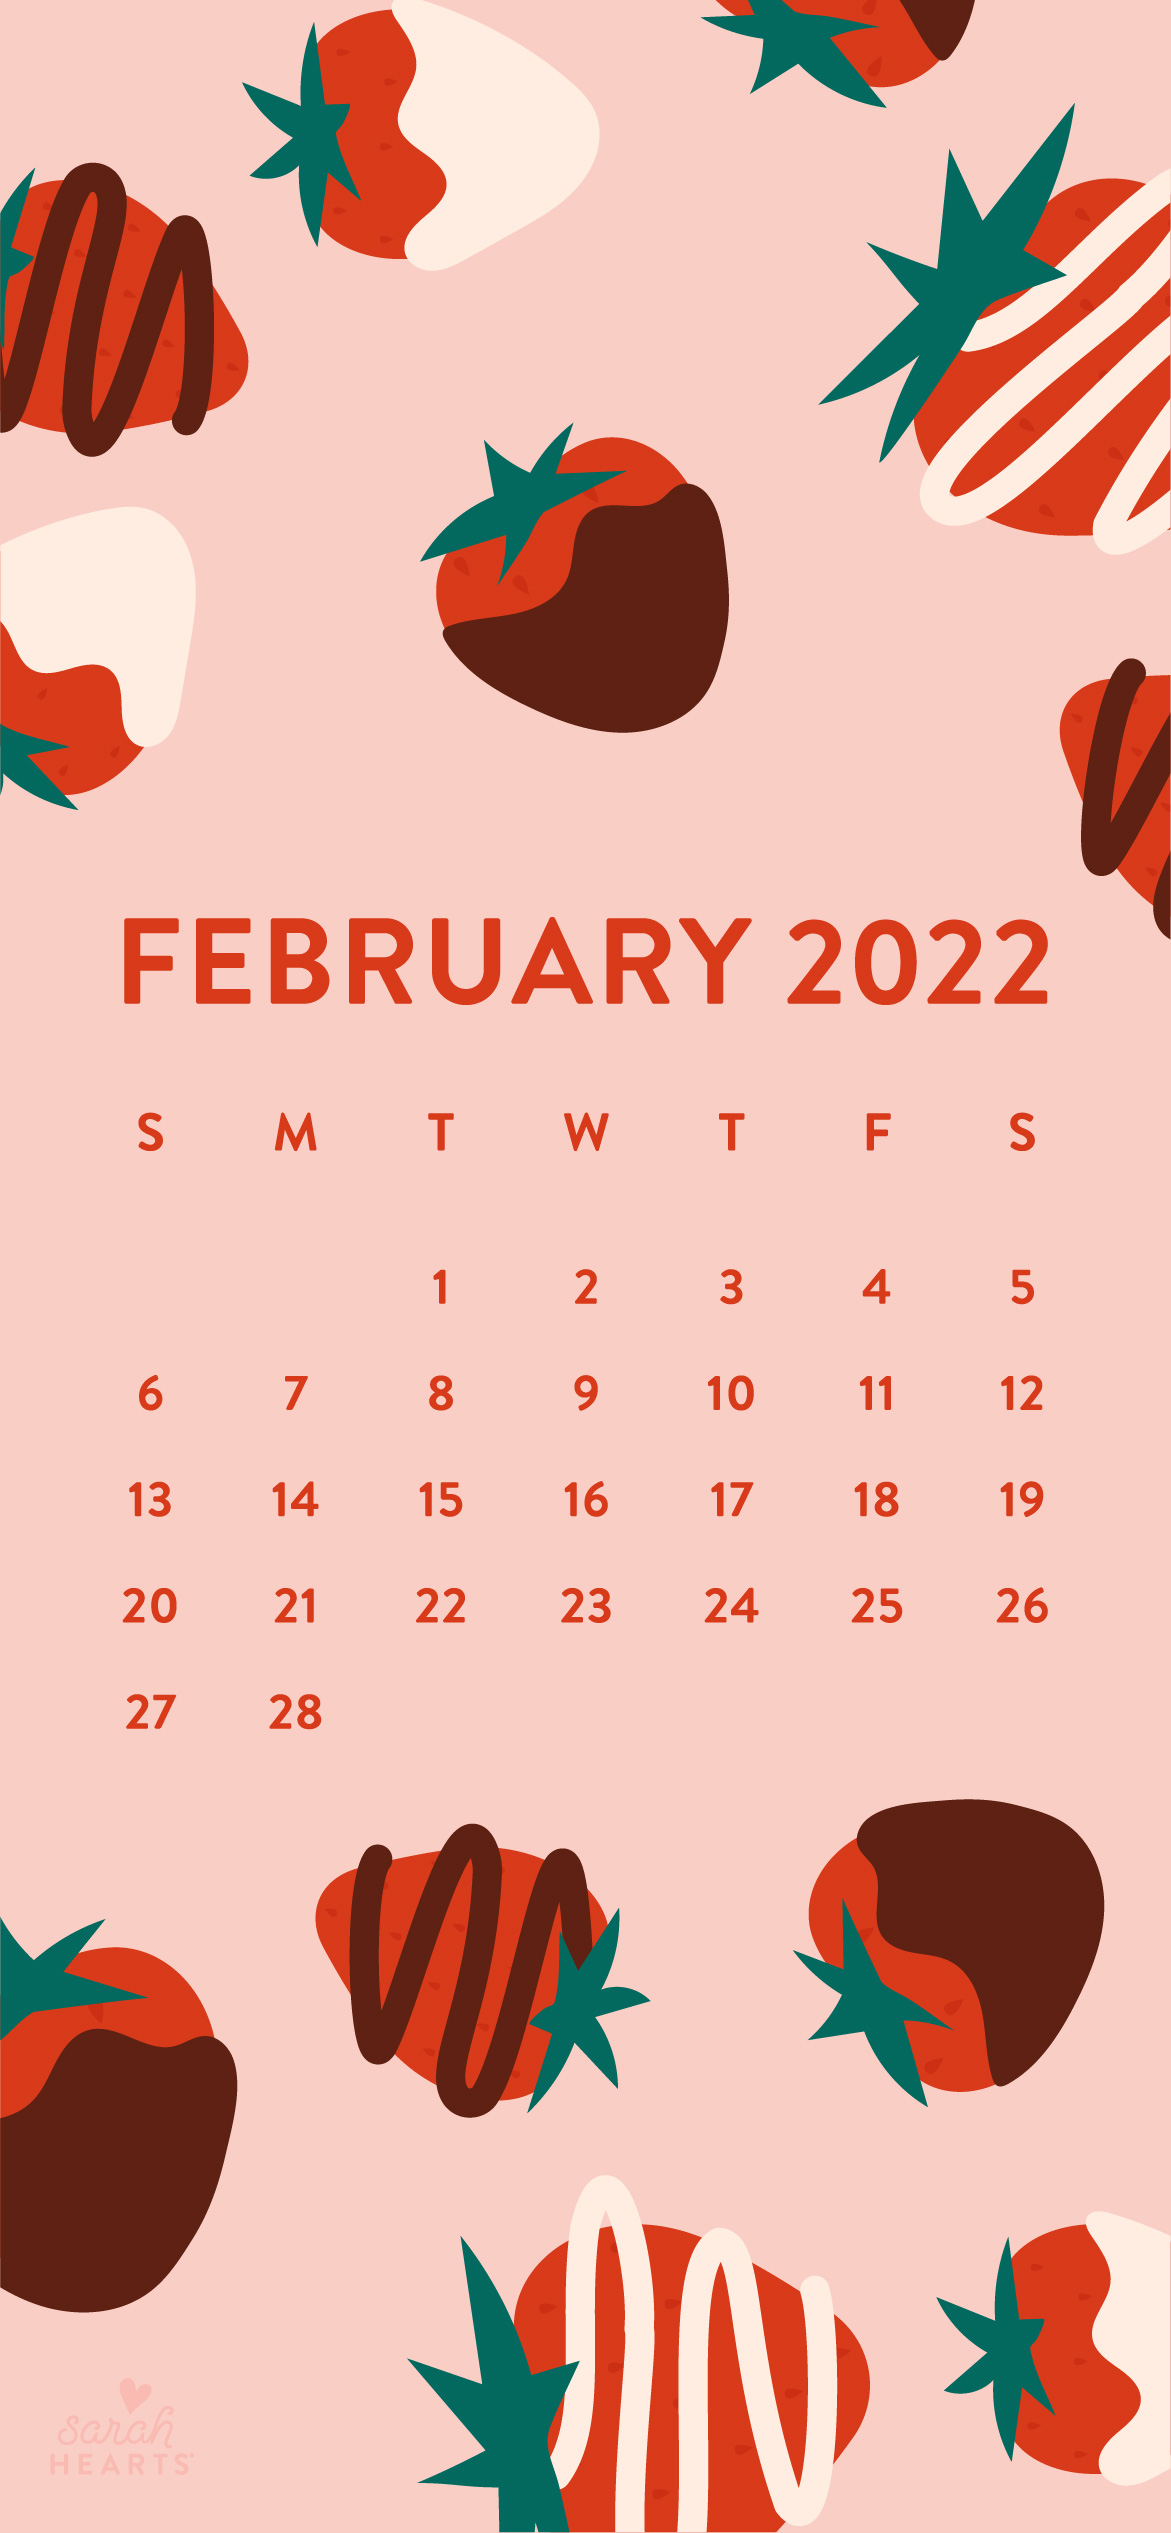 February Schedule Wallpaper for iPhone (and Android) of the New